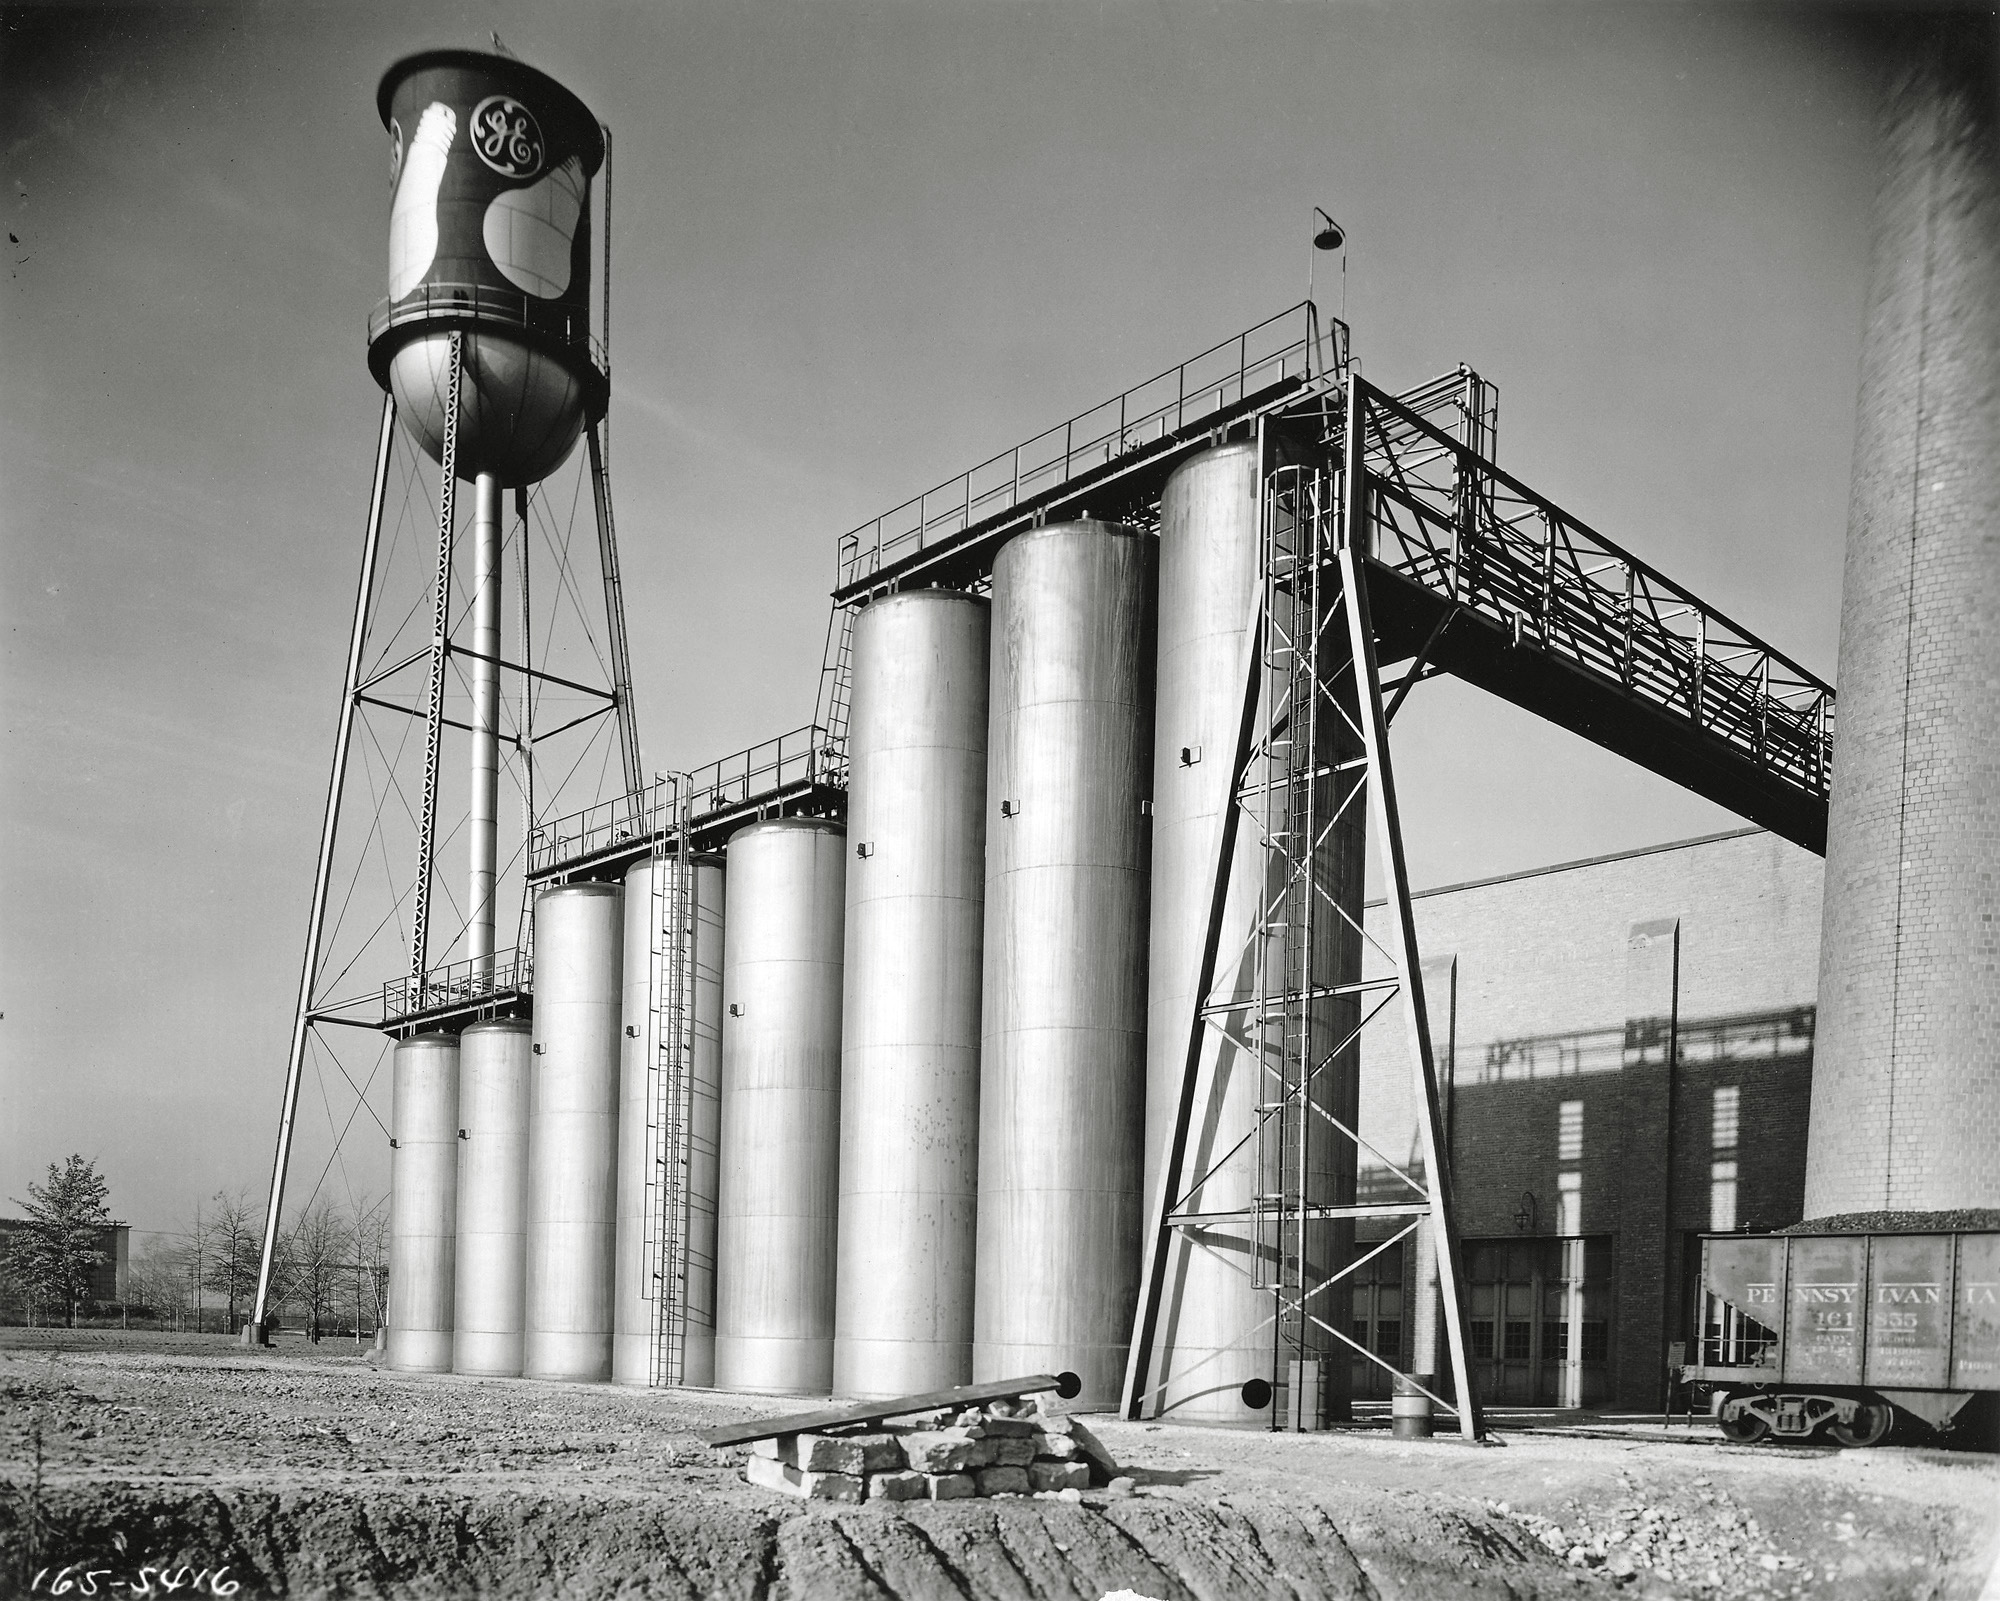 The tank farm, where chemicals are received and stored for use in the processing of tungsten metal, at a General Electric plant on the east side of Cleveland, Ohio. From a 5 x 7 glass negative taken shortly after the plant opened in the spring of 1932. View full size.